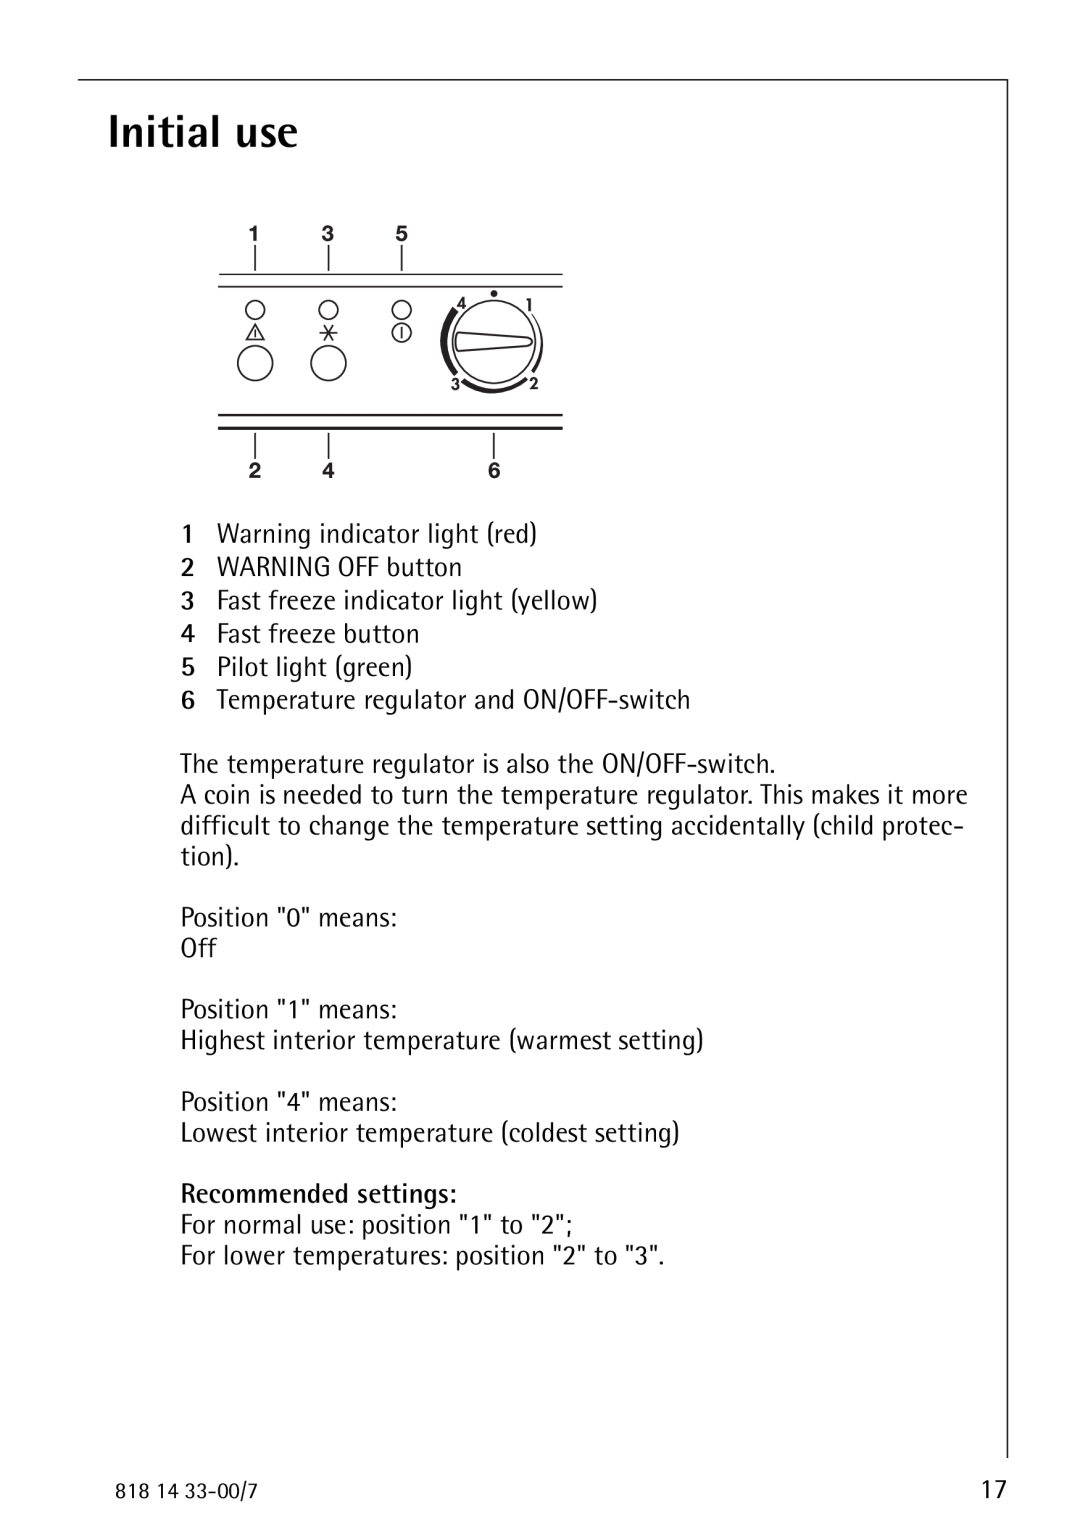 Electrolux 2170-4 operating instructions Initial use, Recommended settings 